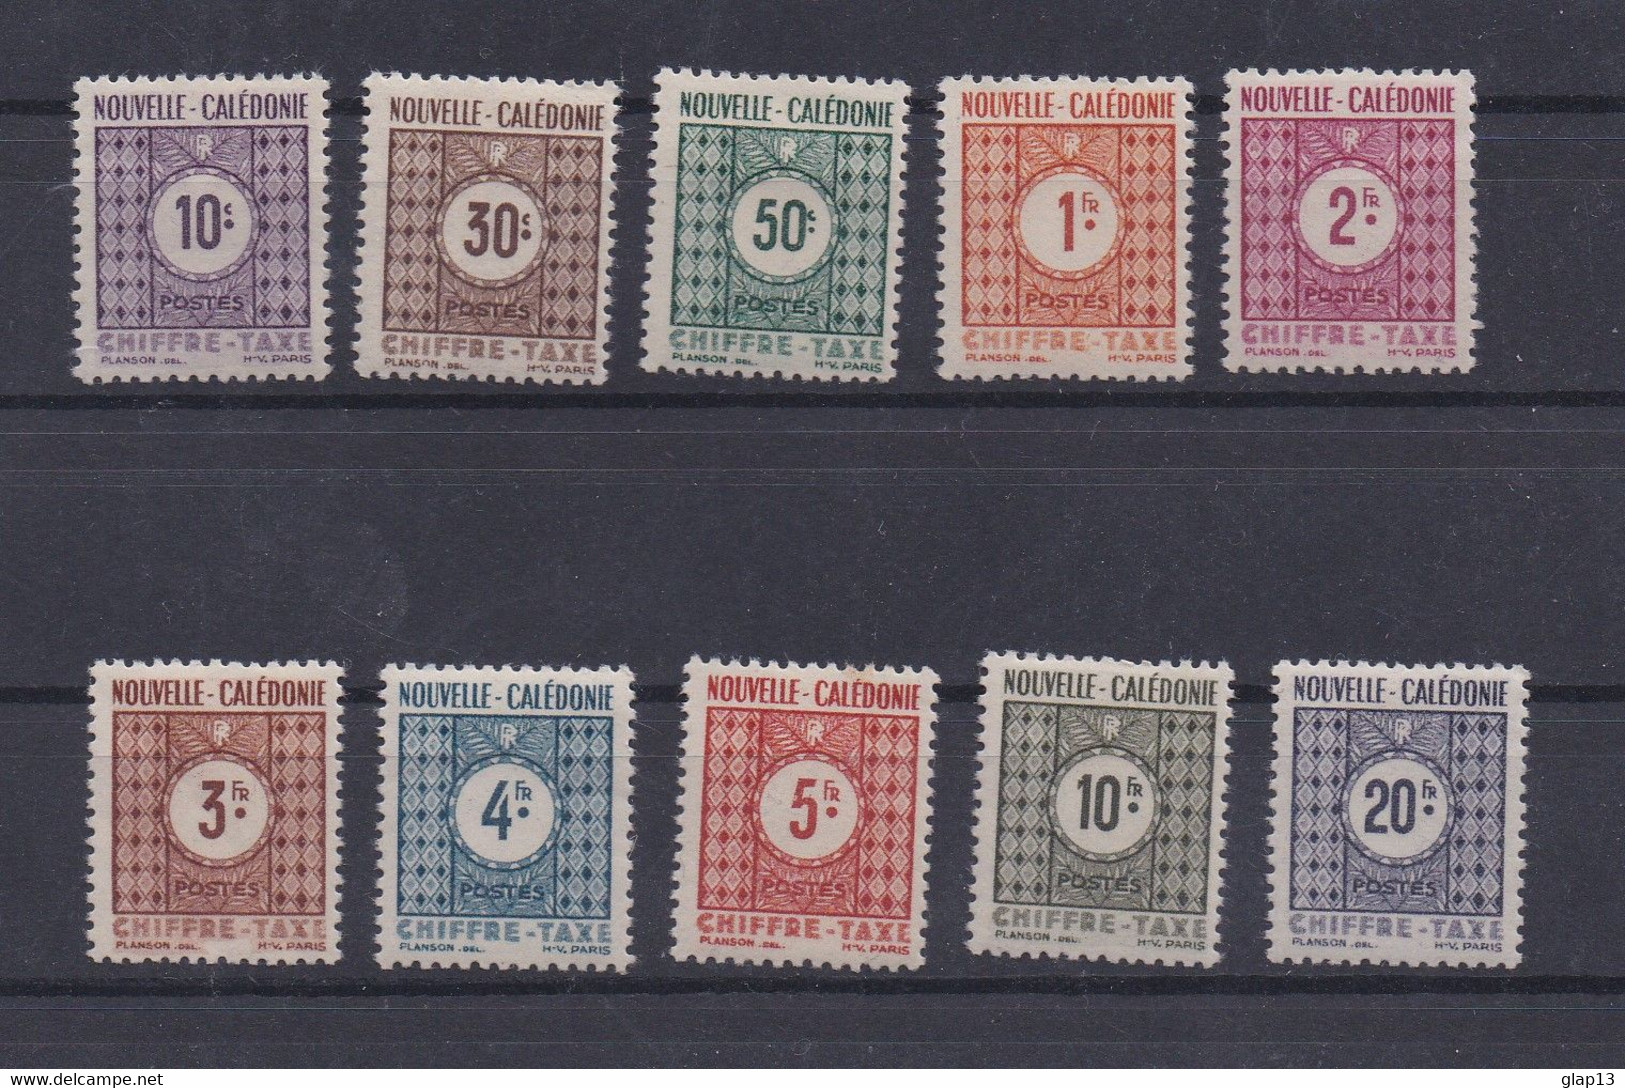 NOUVELLE CALEDONIE 1948 TAXE N°39/48 NEUFS AVEC CHARNIERE - Postage Due